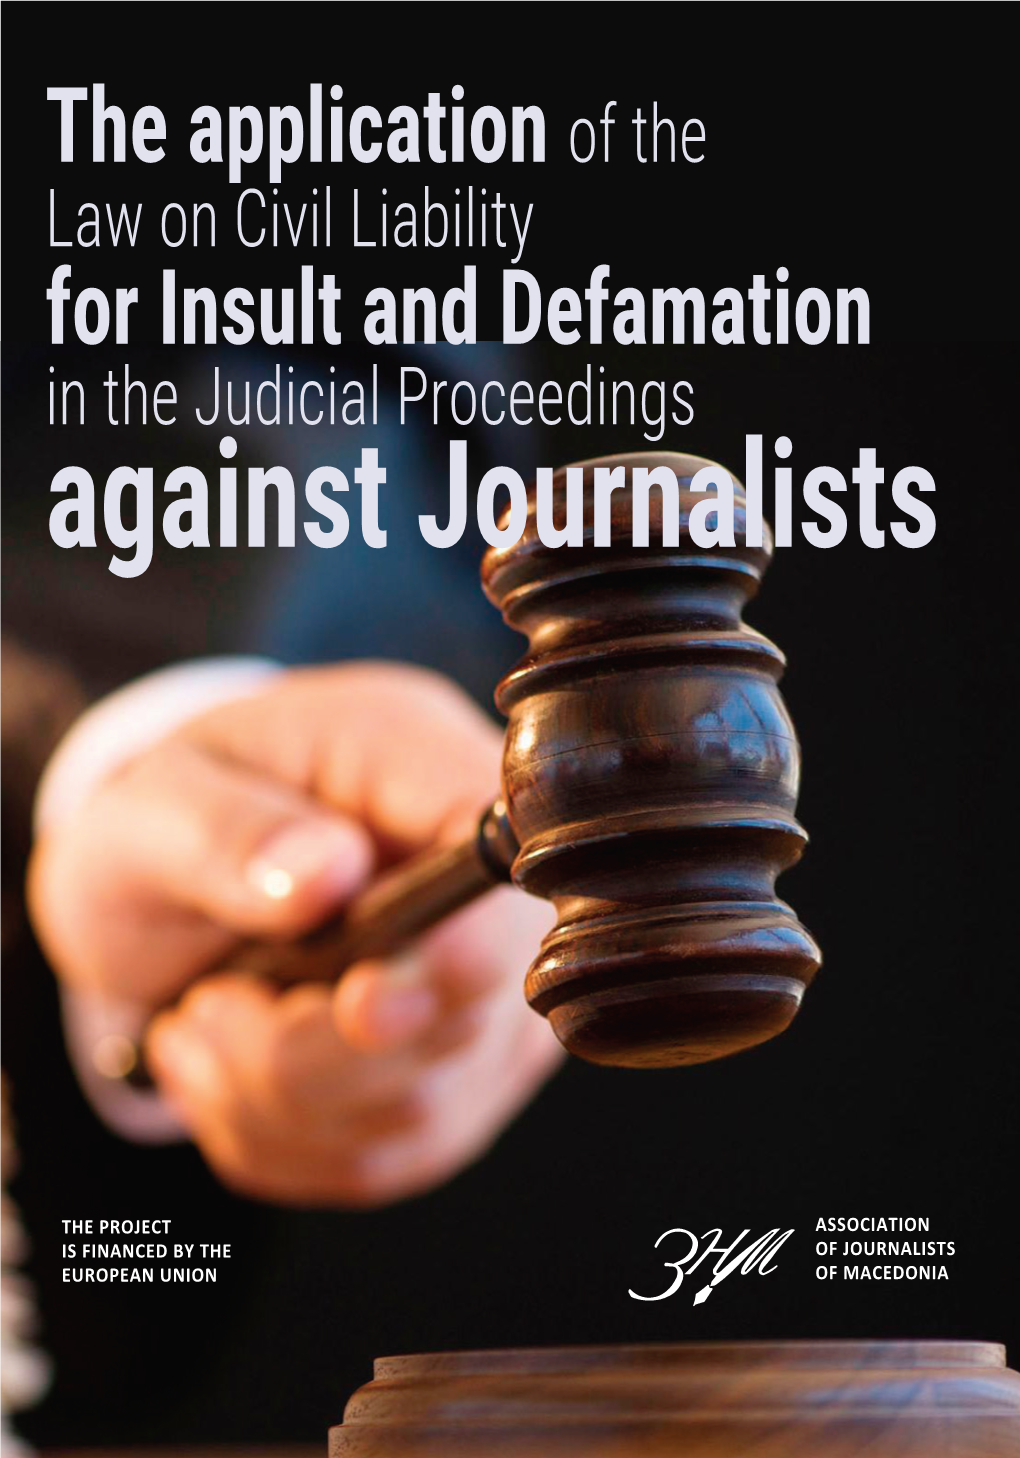 The Application of the Law on Civil Liability for Insult and Defamation in the Judicial Proceedings Against Journalists